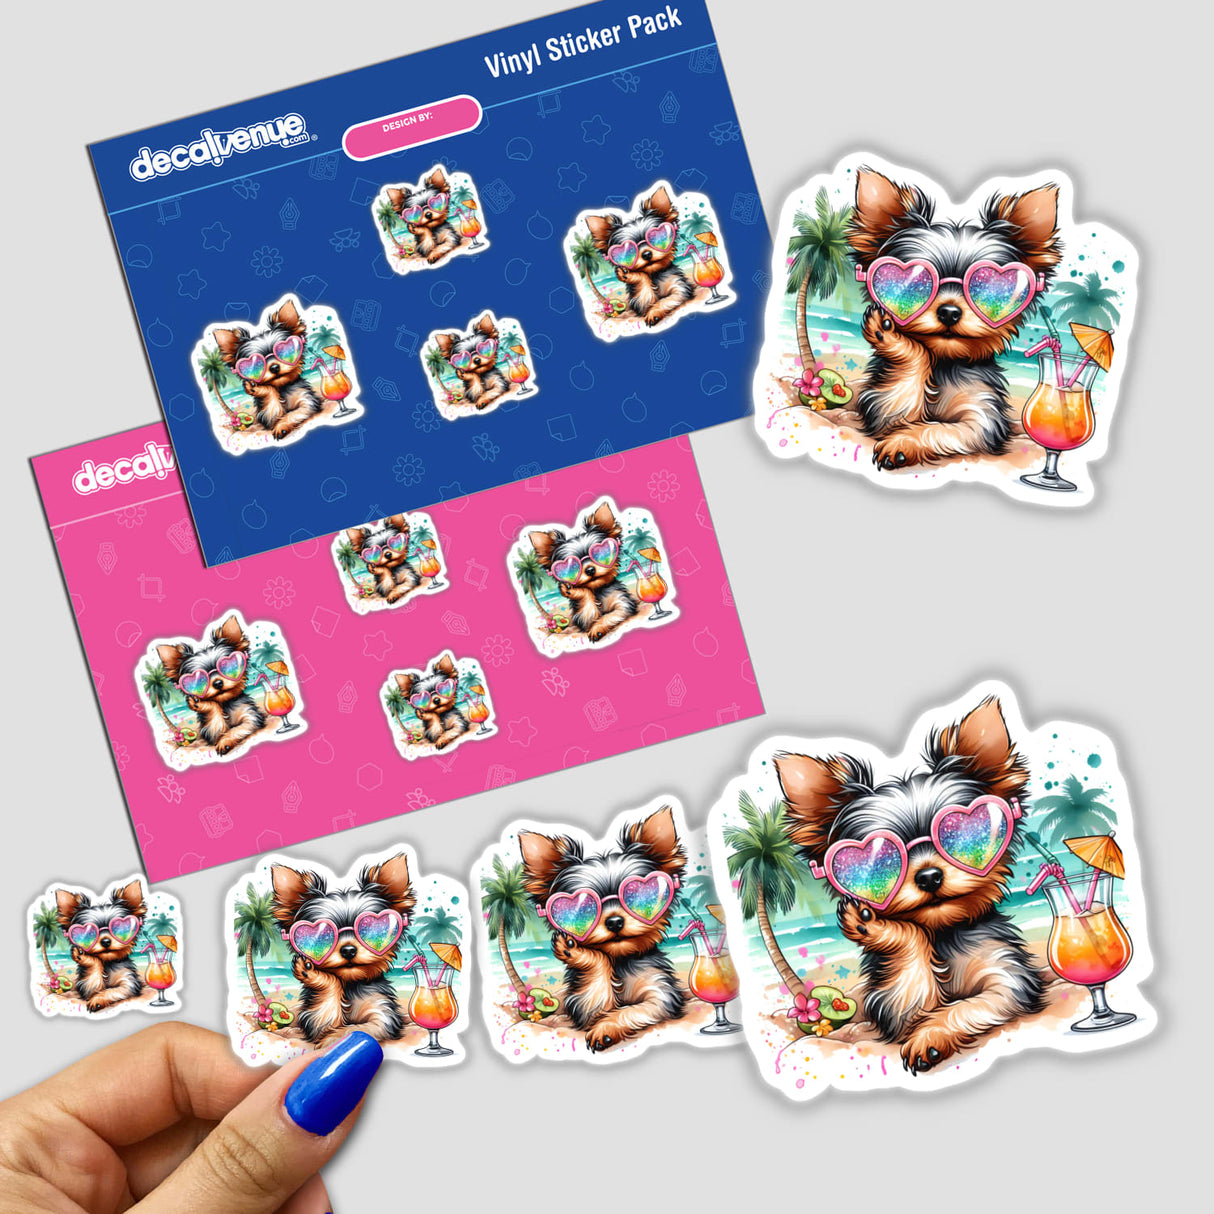 Adorable Yorkie dog enjoying a tropical vacation, wearing sunglasses and relaxing with cocktails on the beach. Colorful digital artwork stickers featuring the cute pup in a lively, summery scene.